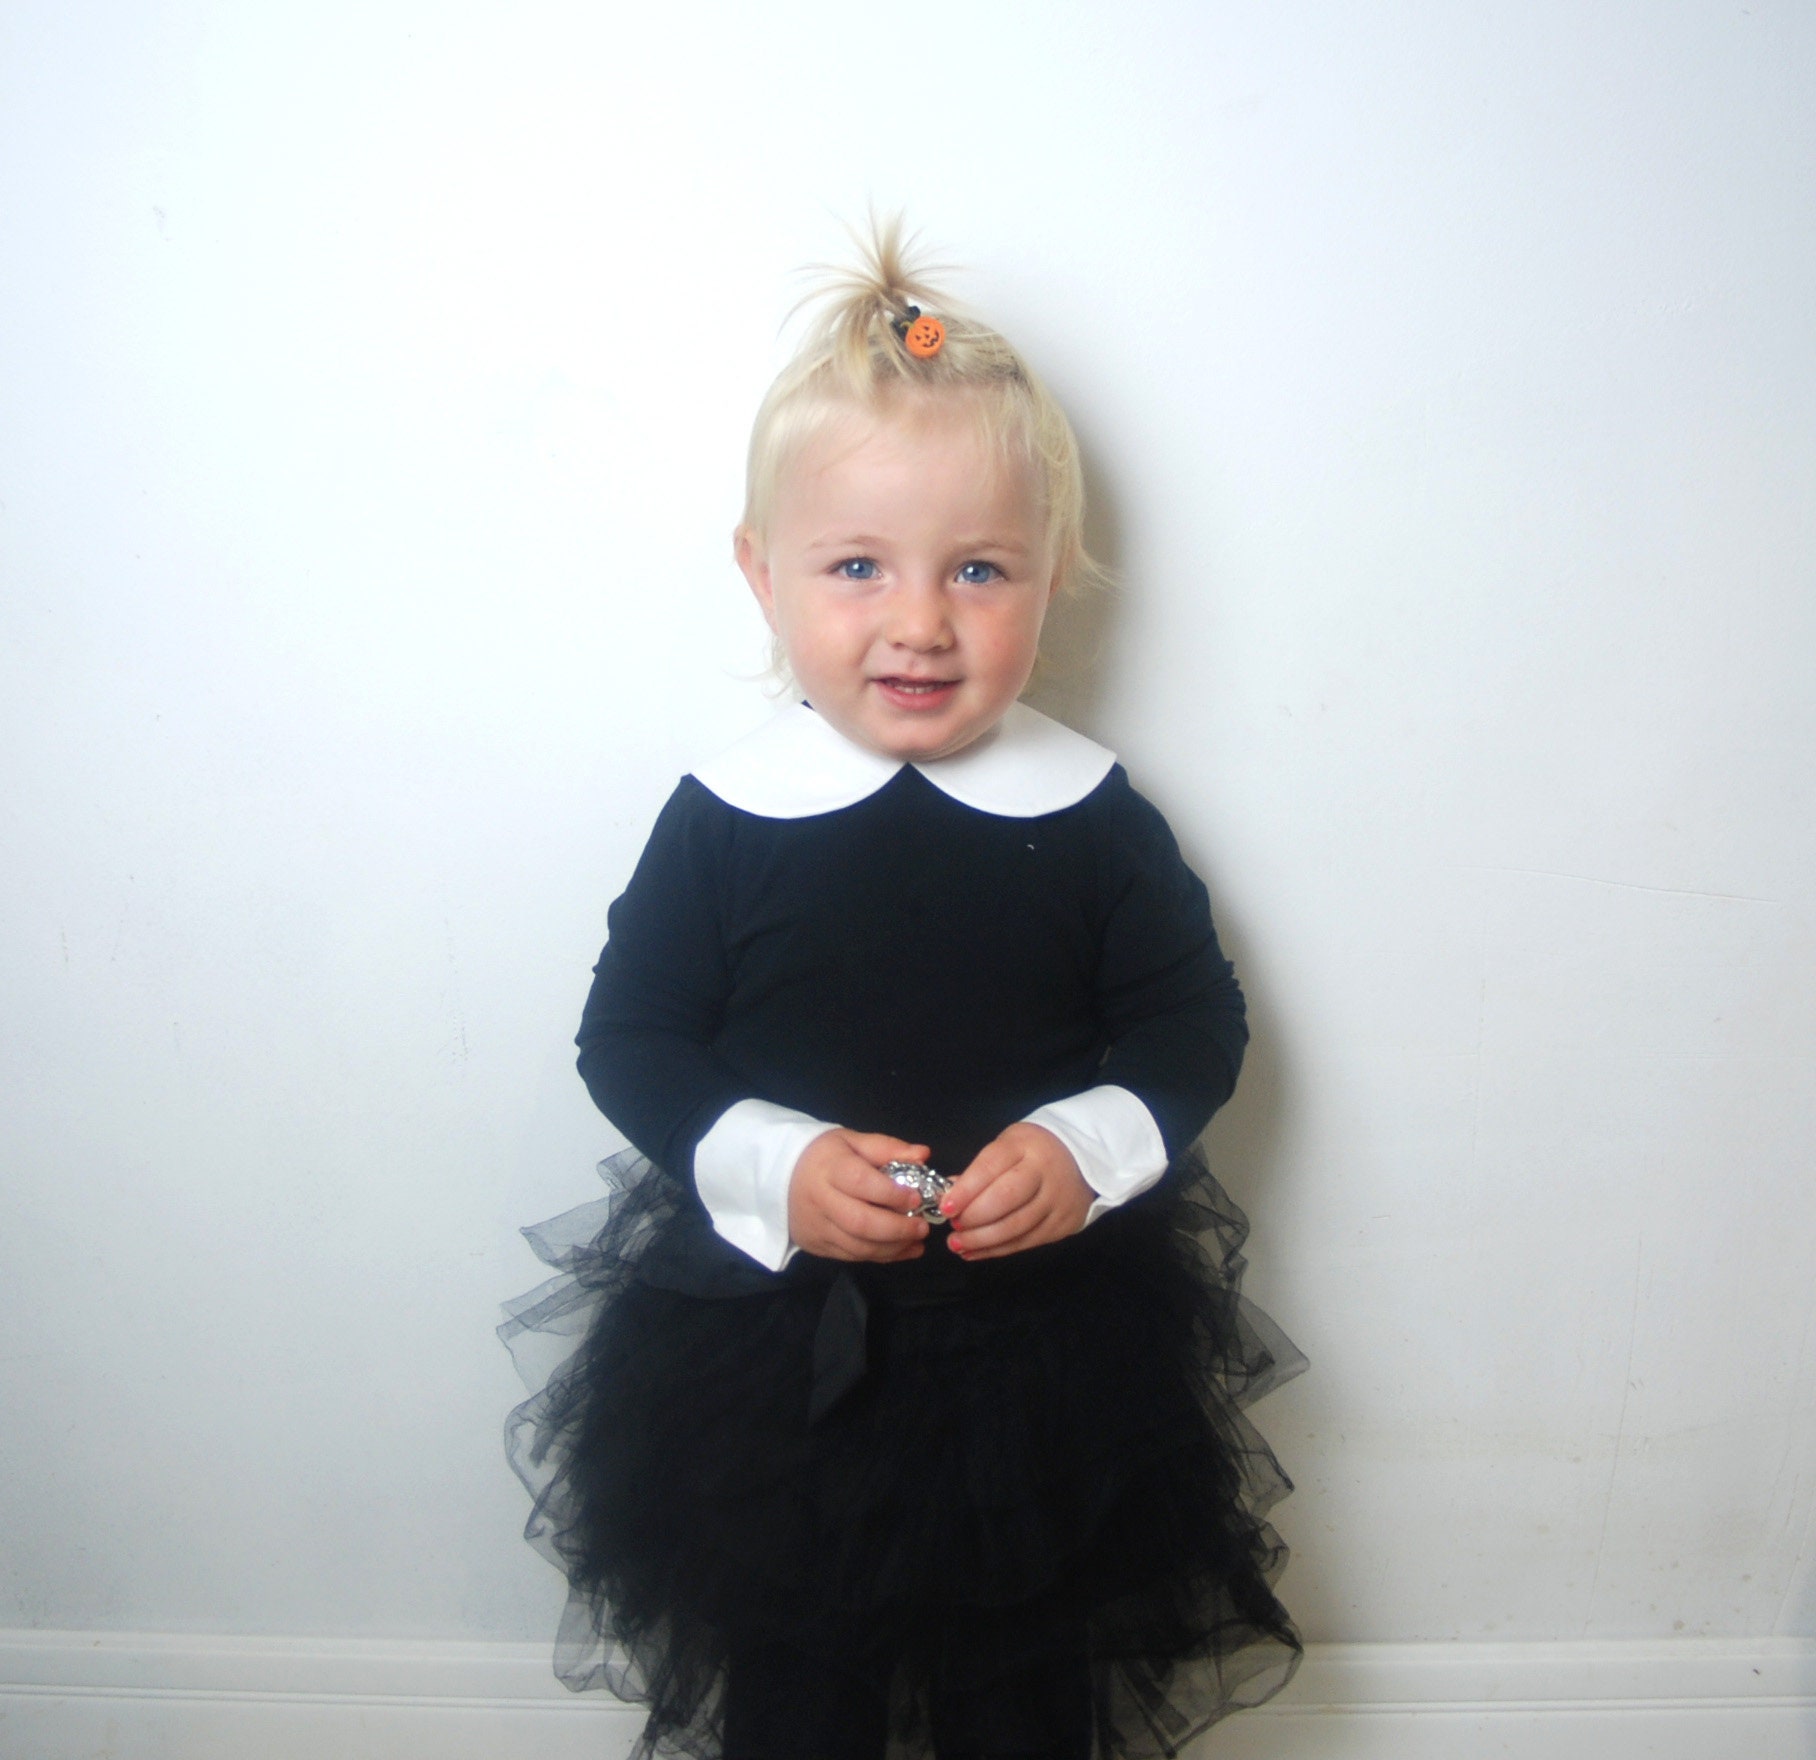 Wednesday Addams Outfit Addams Costume Set Collar and Wrist 